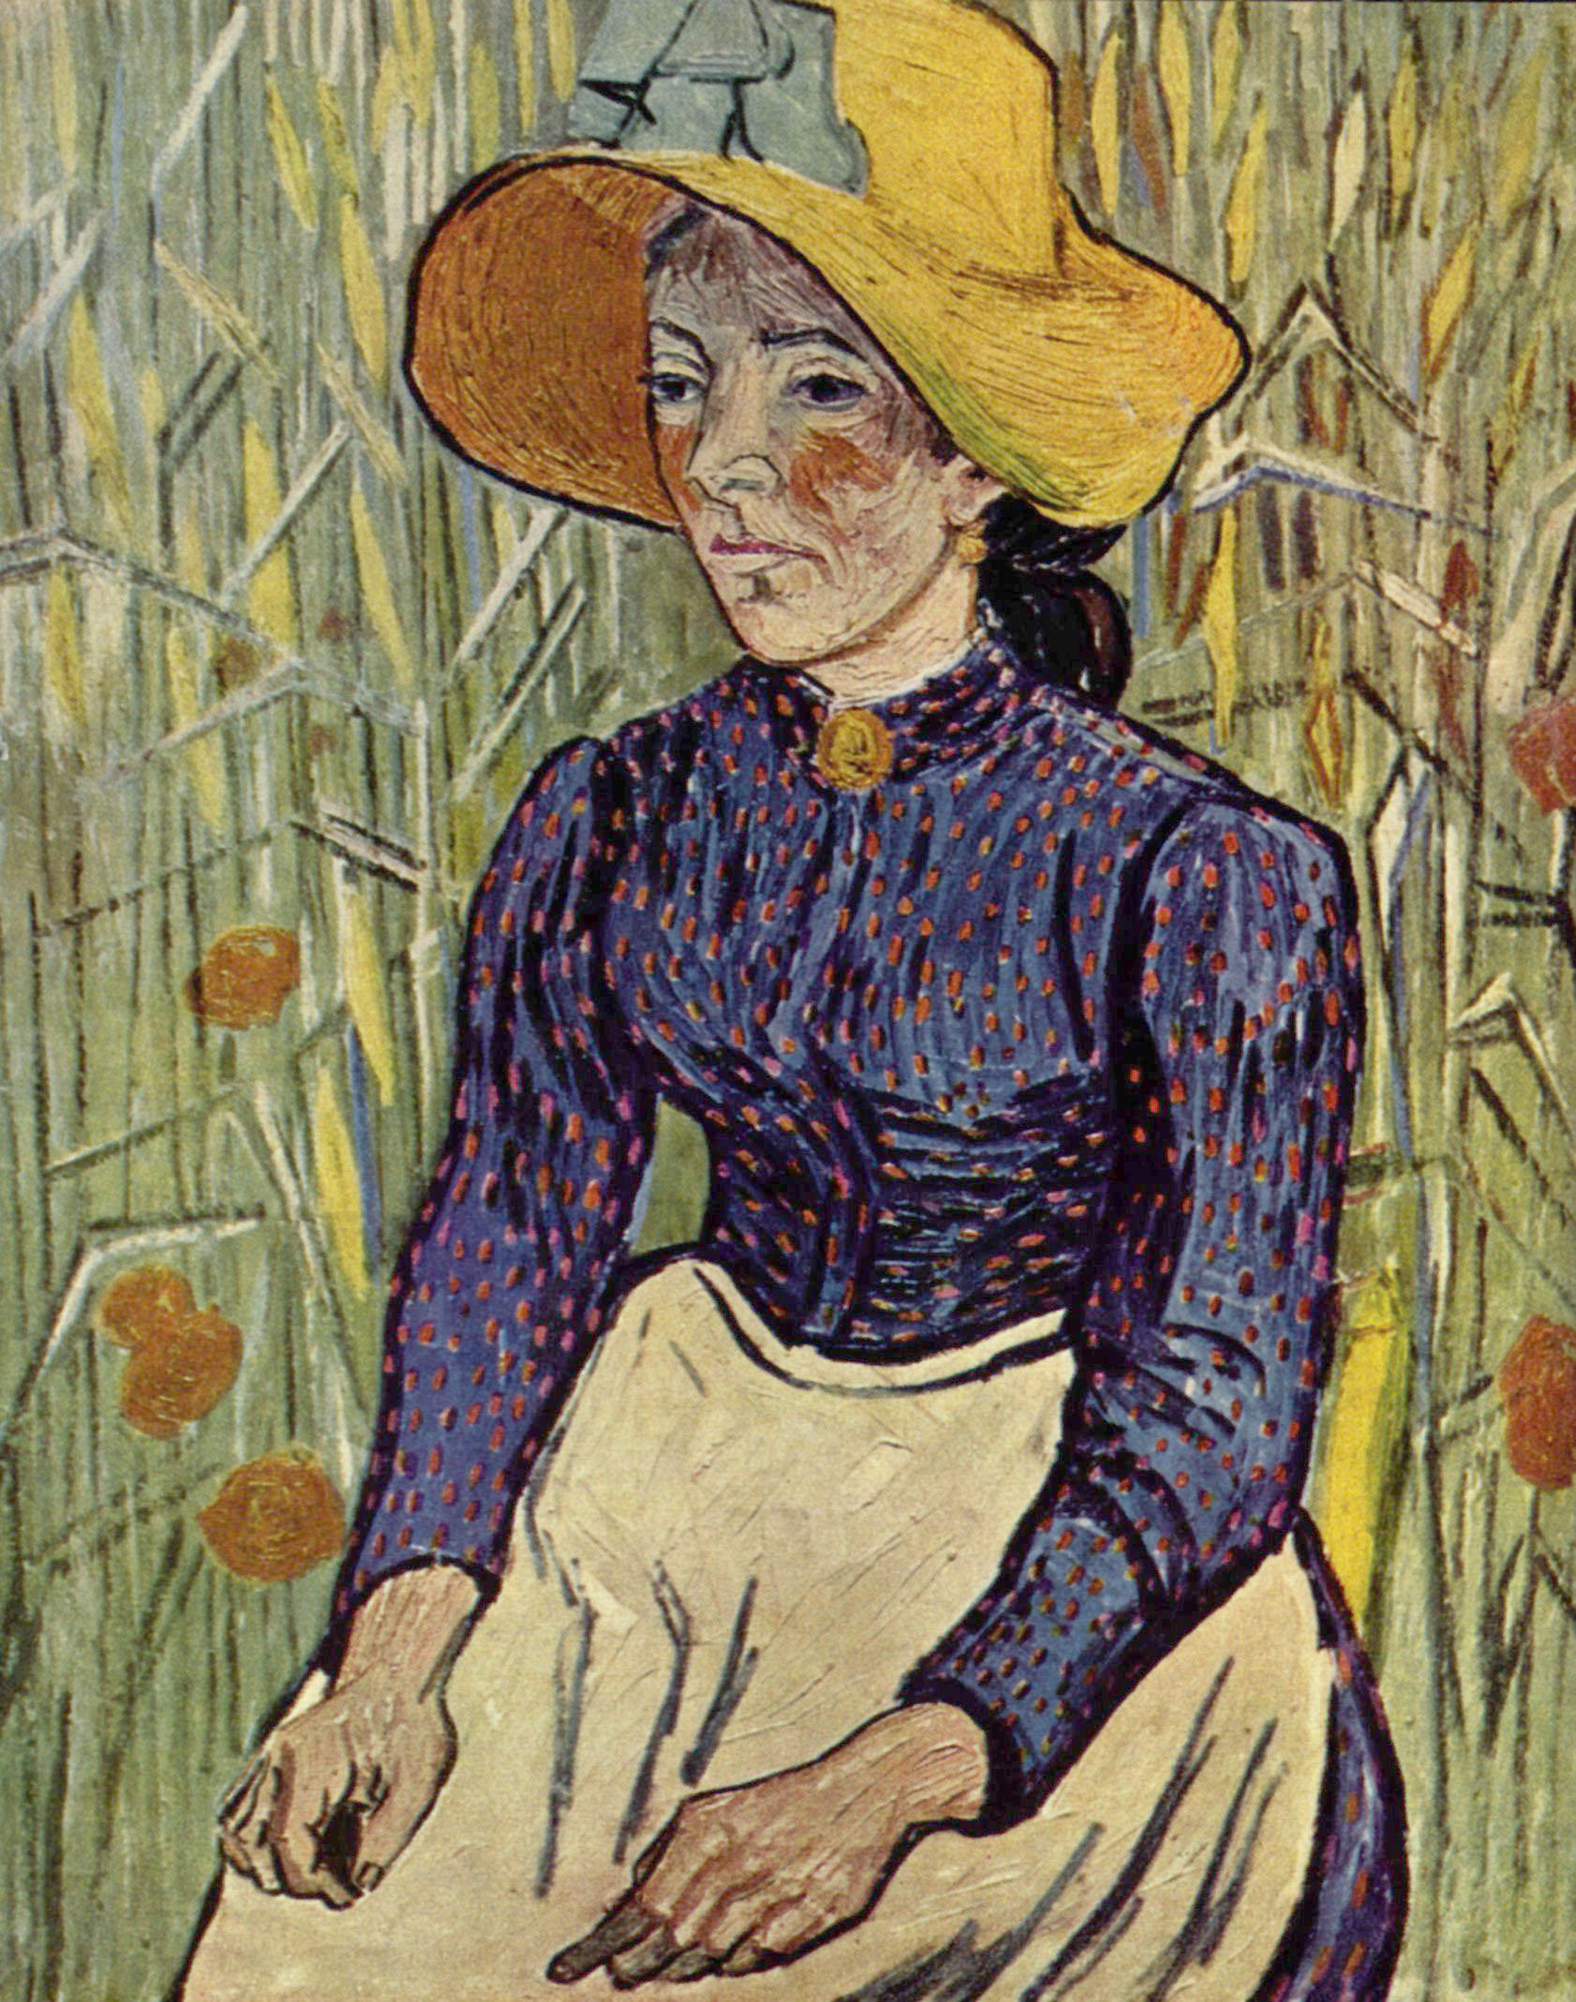 Peasant Woman Against a Background of Wheat by Vincent van Gogh 63.1 Million